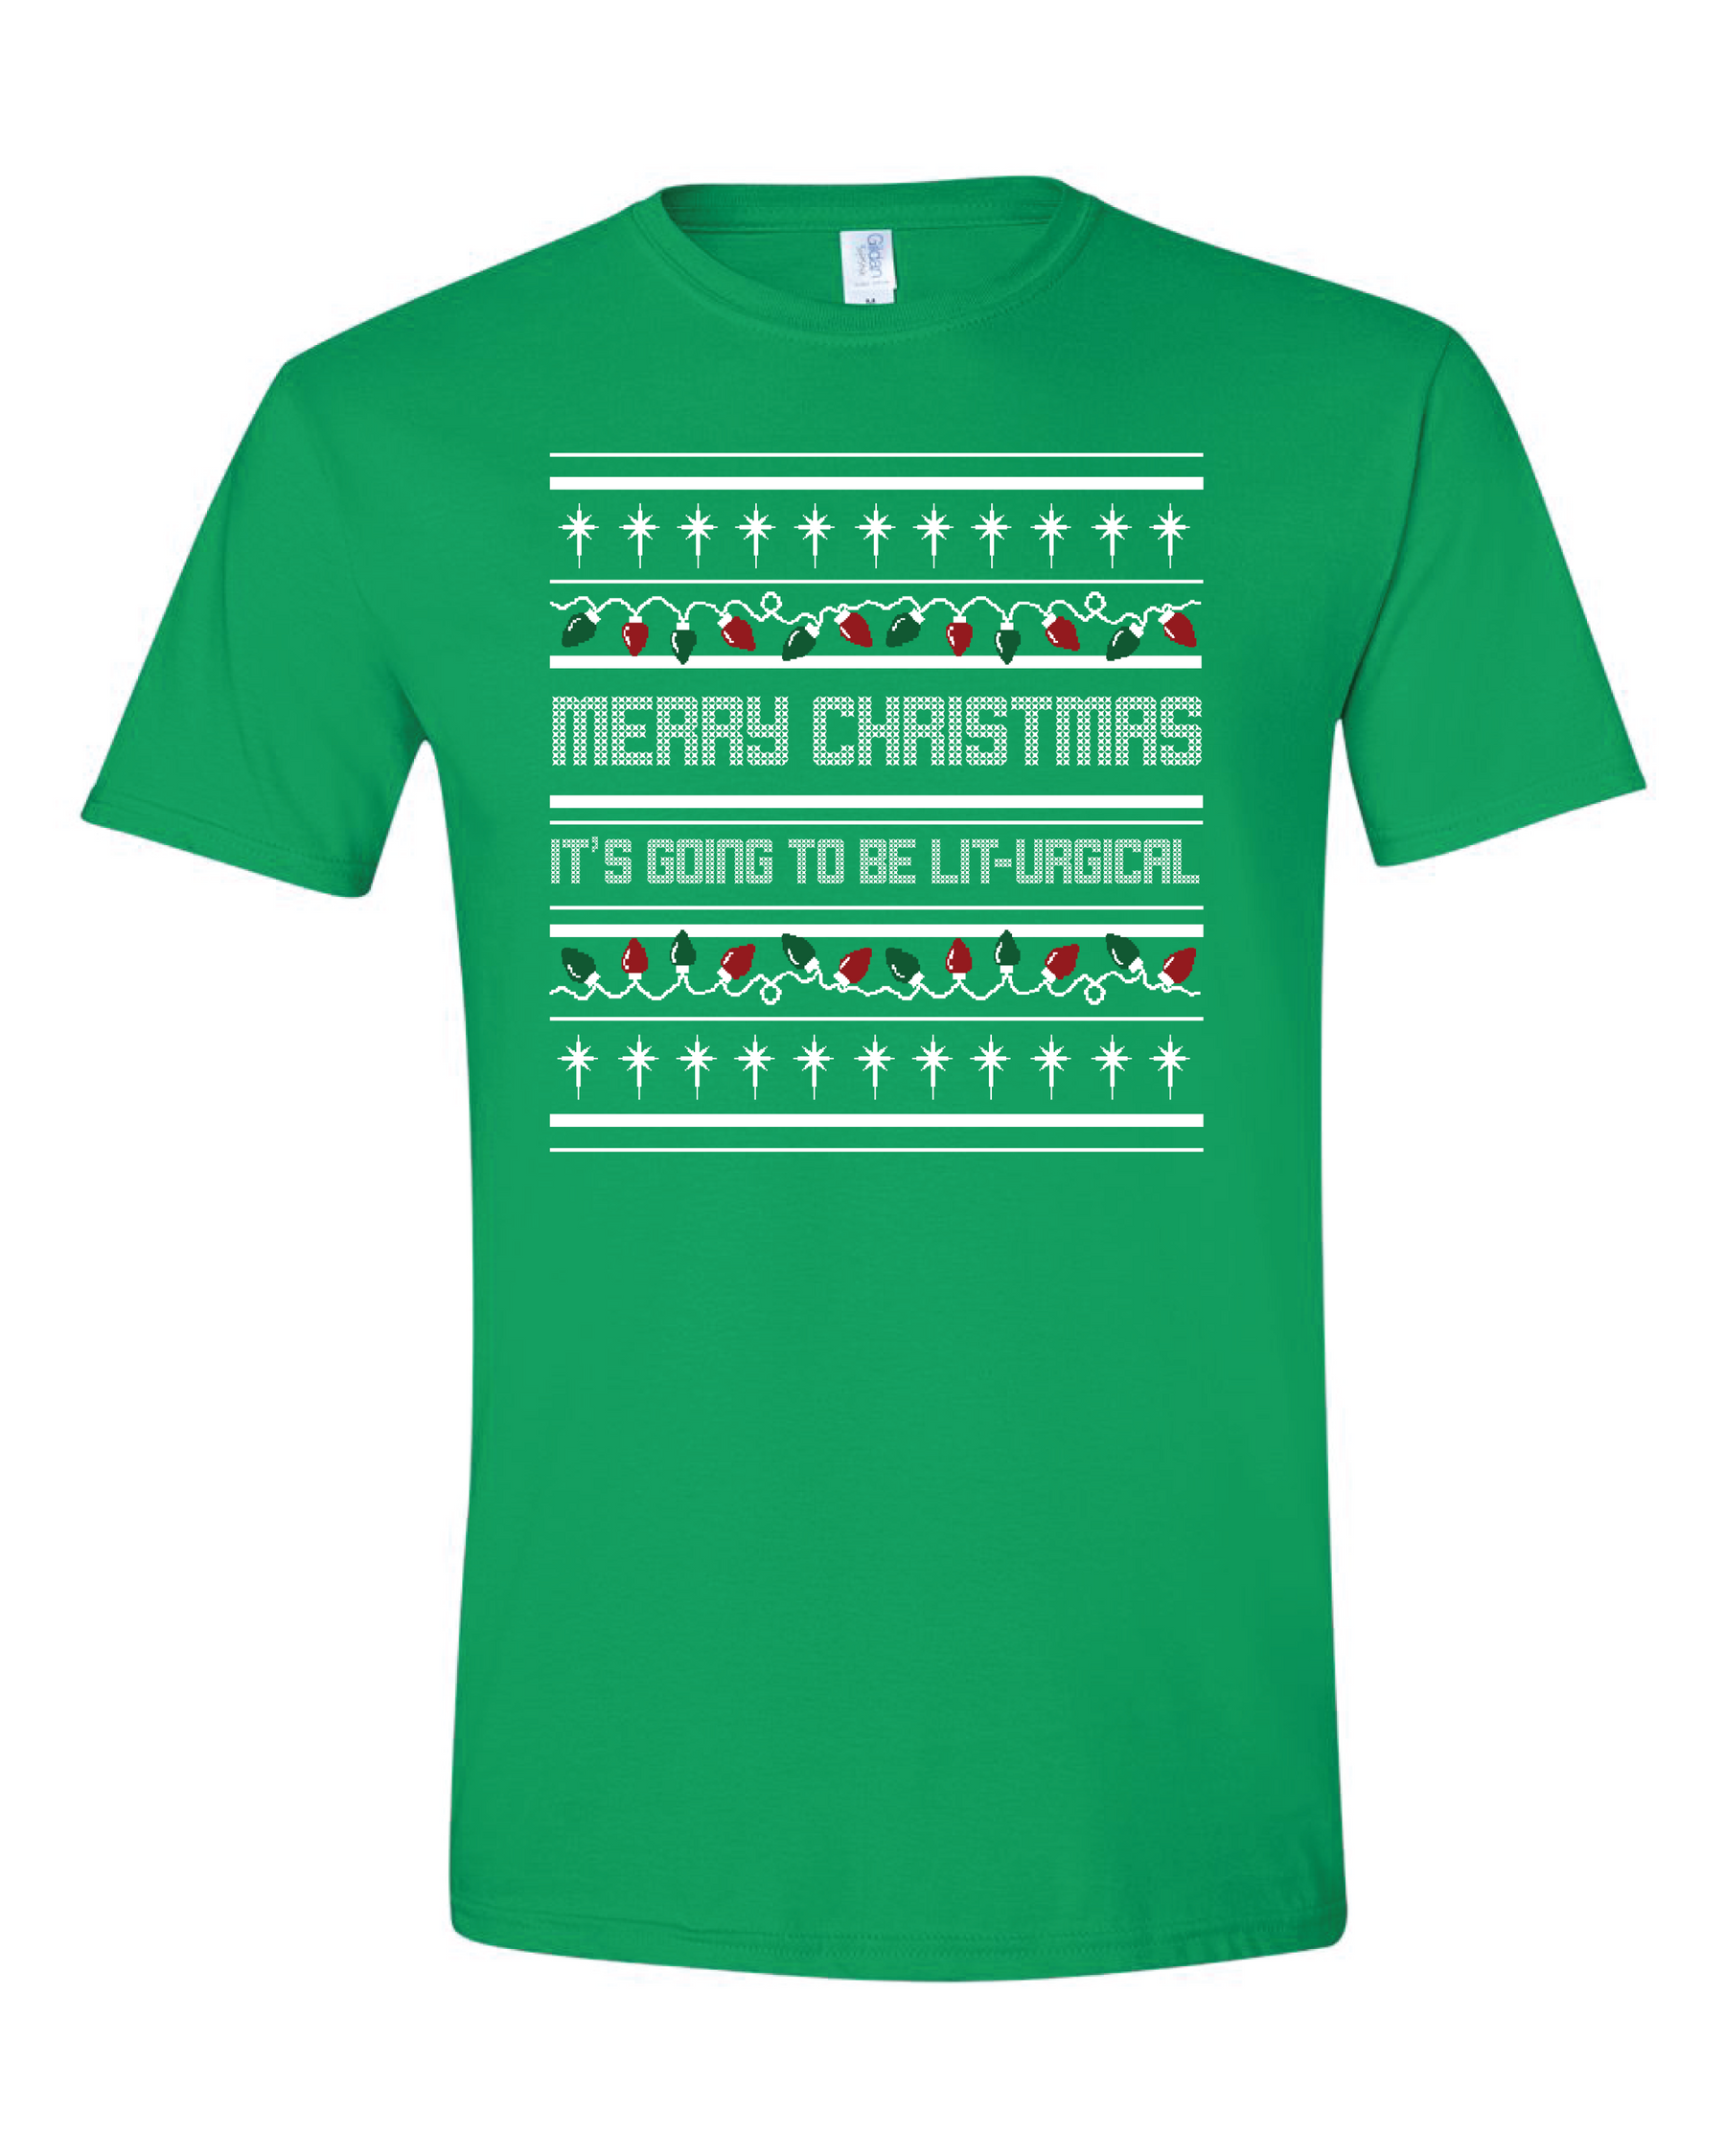 It's Going to be Lit-urgical! - Christmas T Shirt